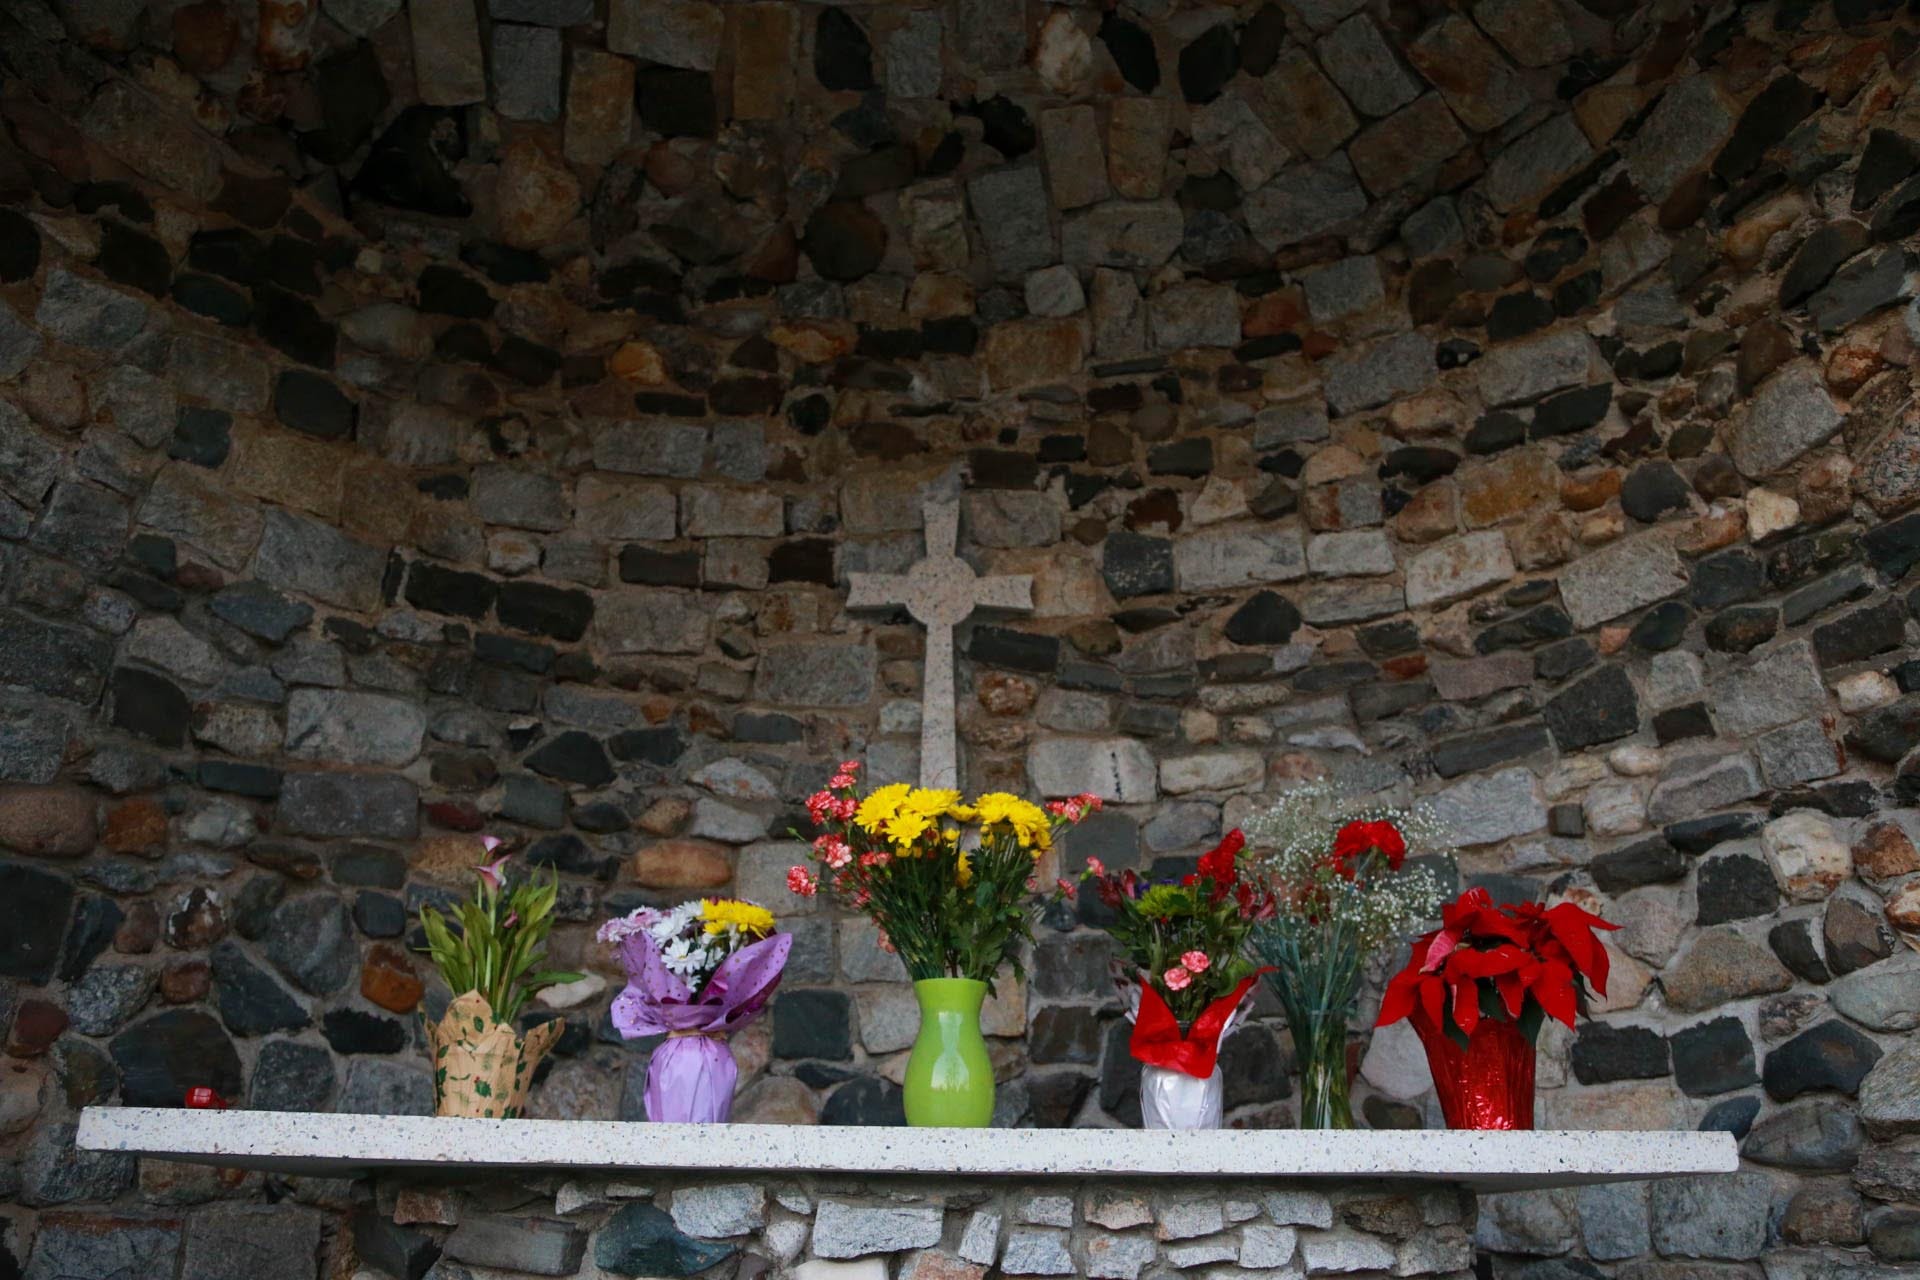 Flowers adorne the alter inside the grotto at Our Lady of Lourdes Catholic Church in Port Wentworth.